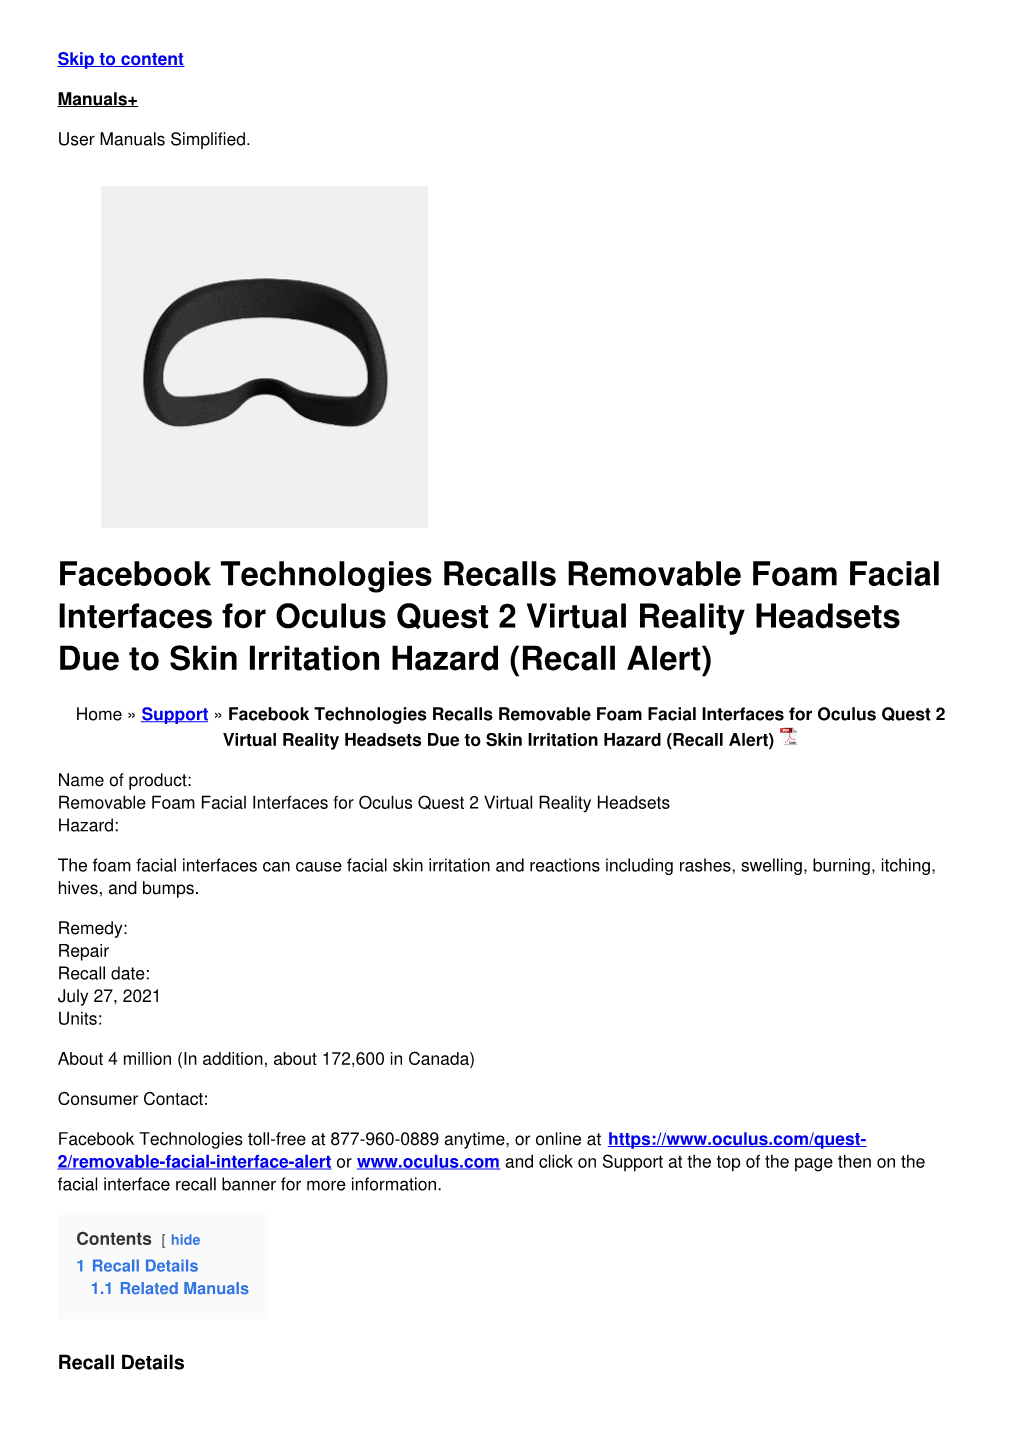 Facebook Technologies Recalls Removable Foam Facial Interfaces for Oculus Quest 2 Virtual Reality Headsets Due to Skin Irritation Hazard (Recall Alert)